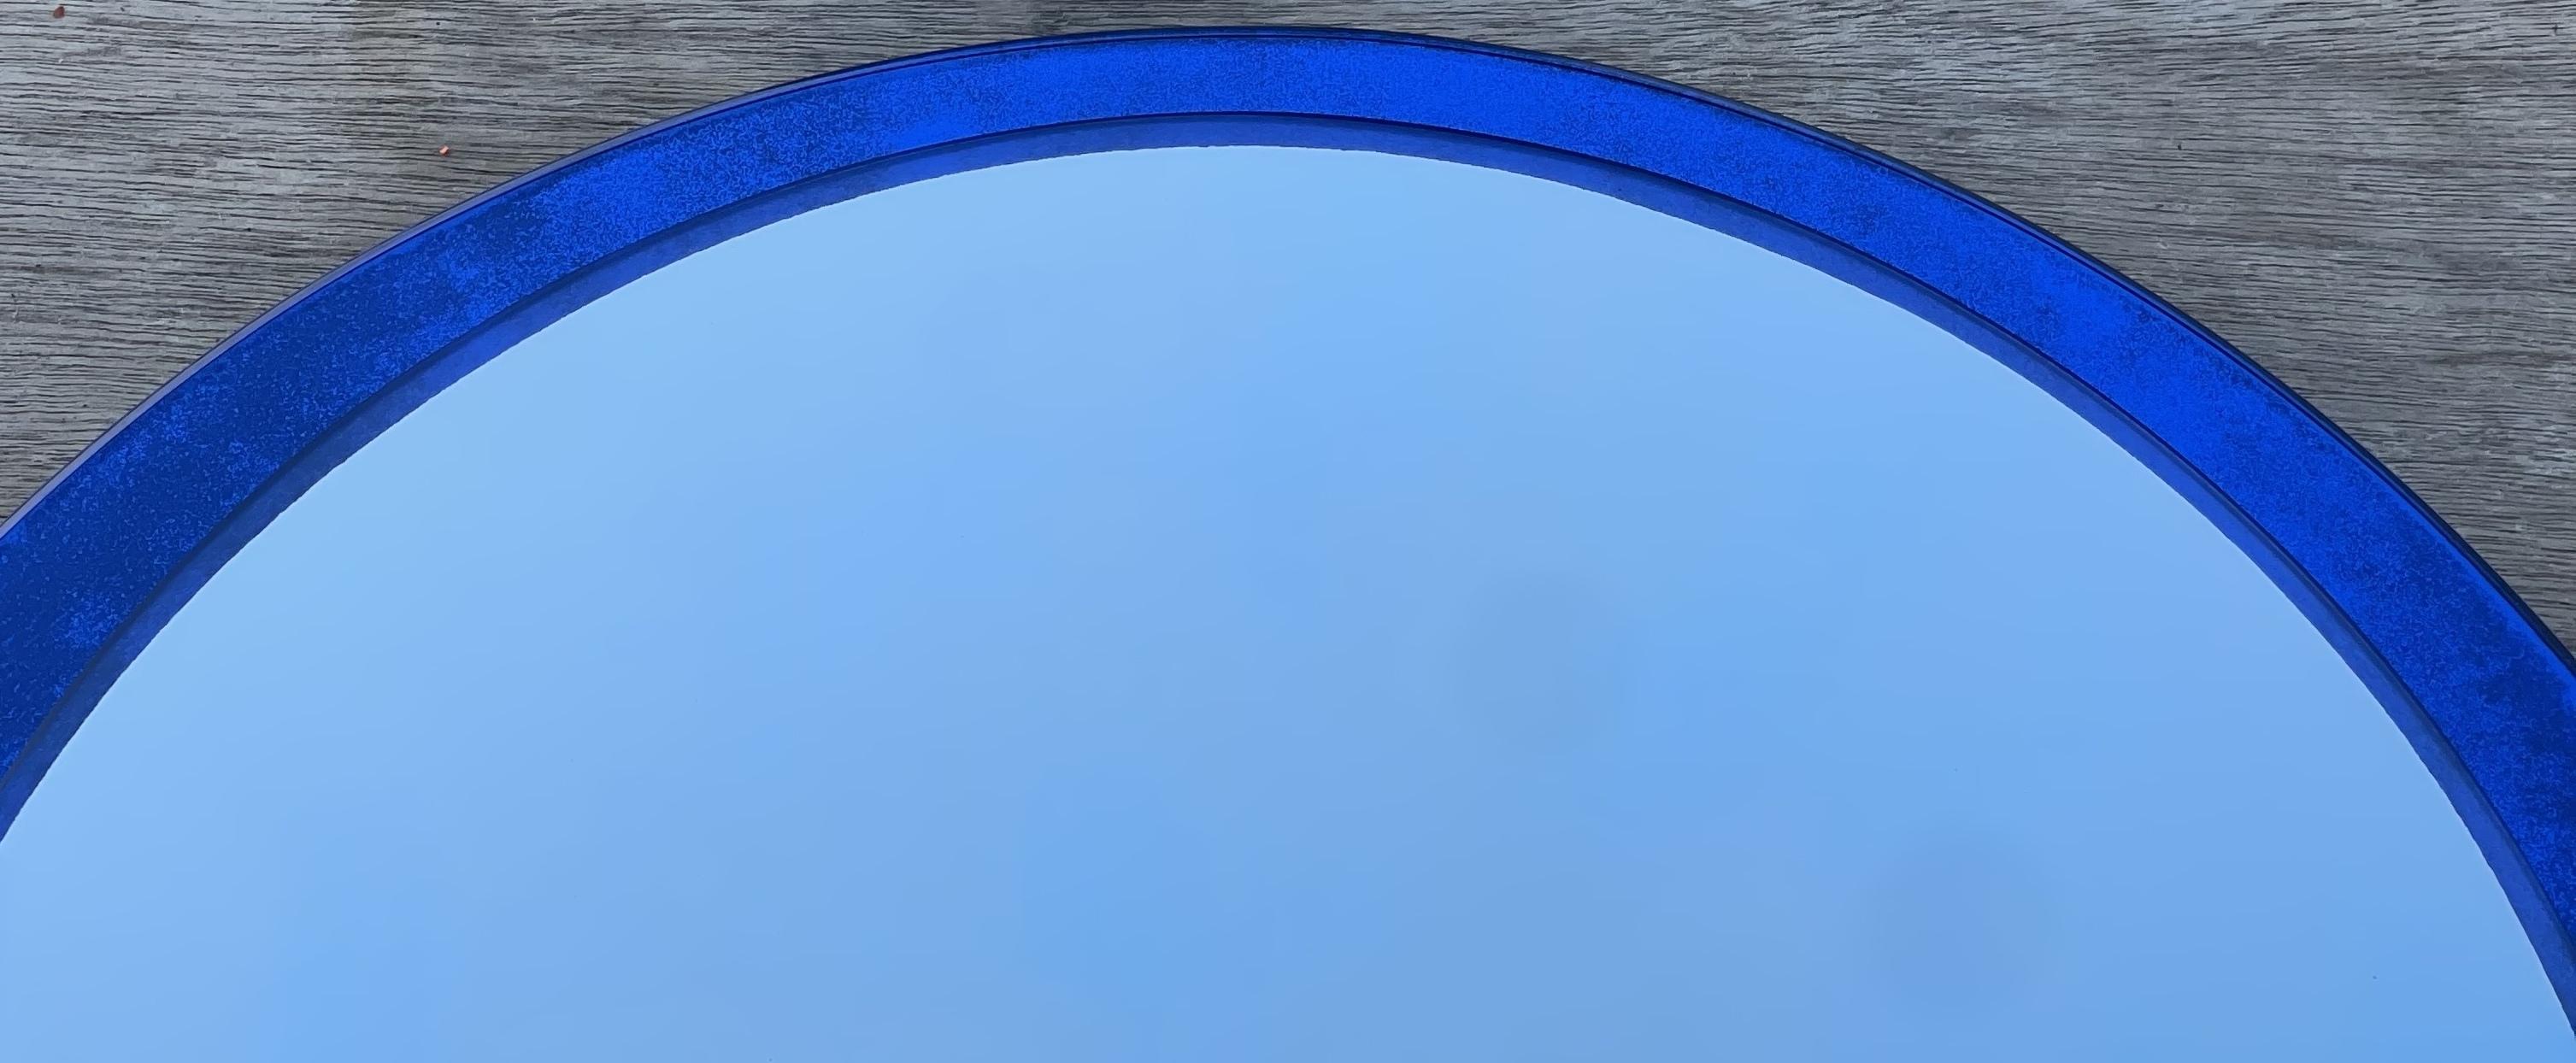 Designer 1970s Veca Made in Italy Mid-Century Modern Wall Cobalt Blue Mirror For Sale 5